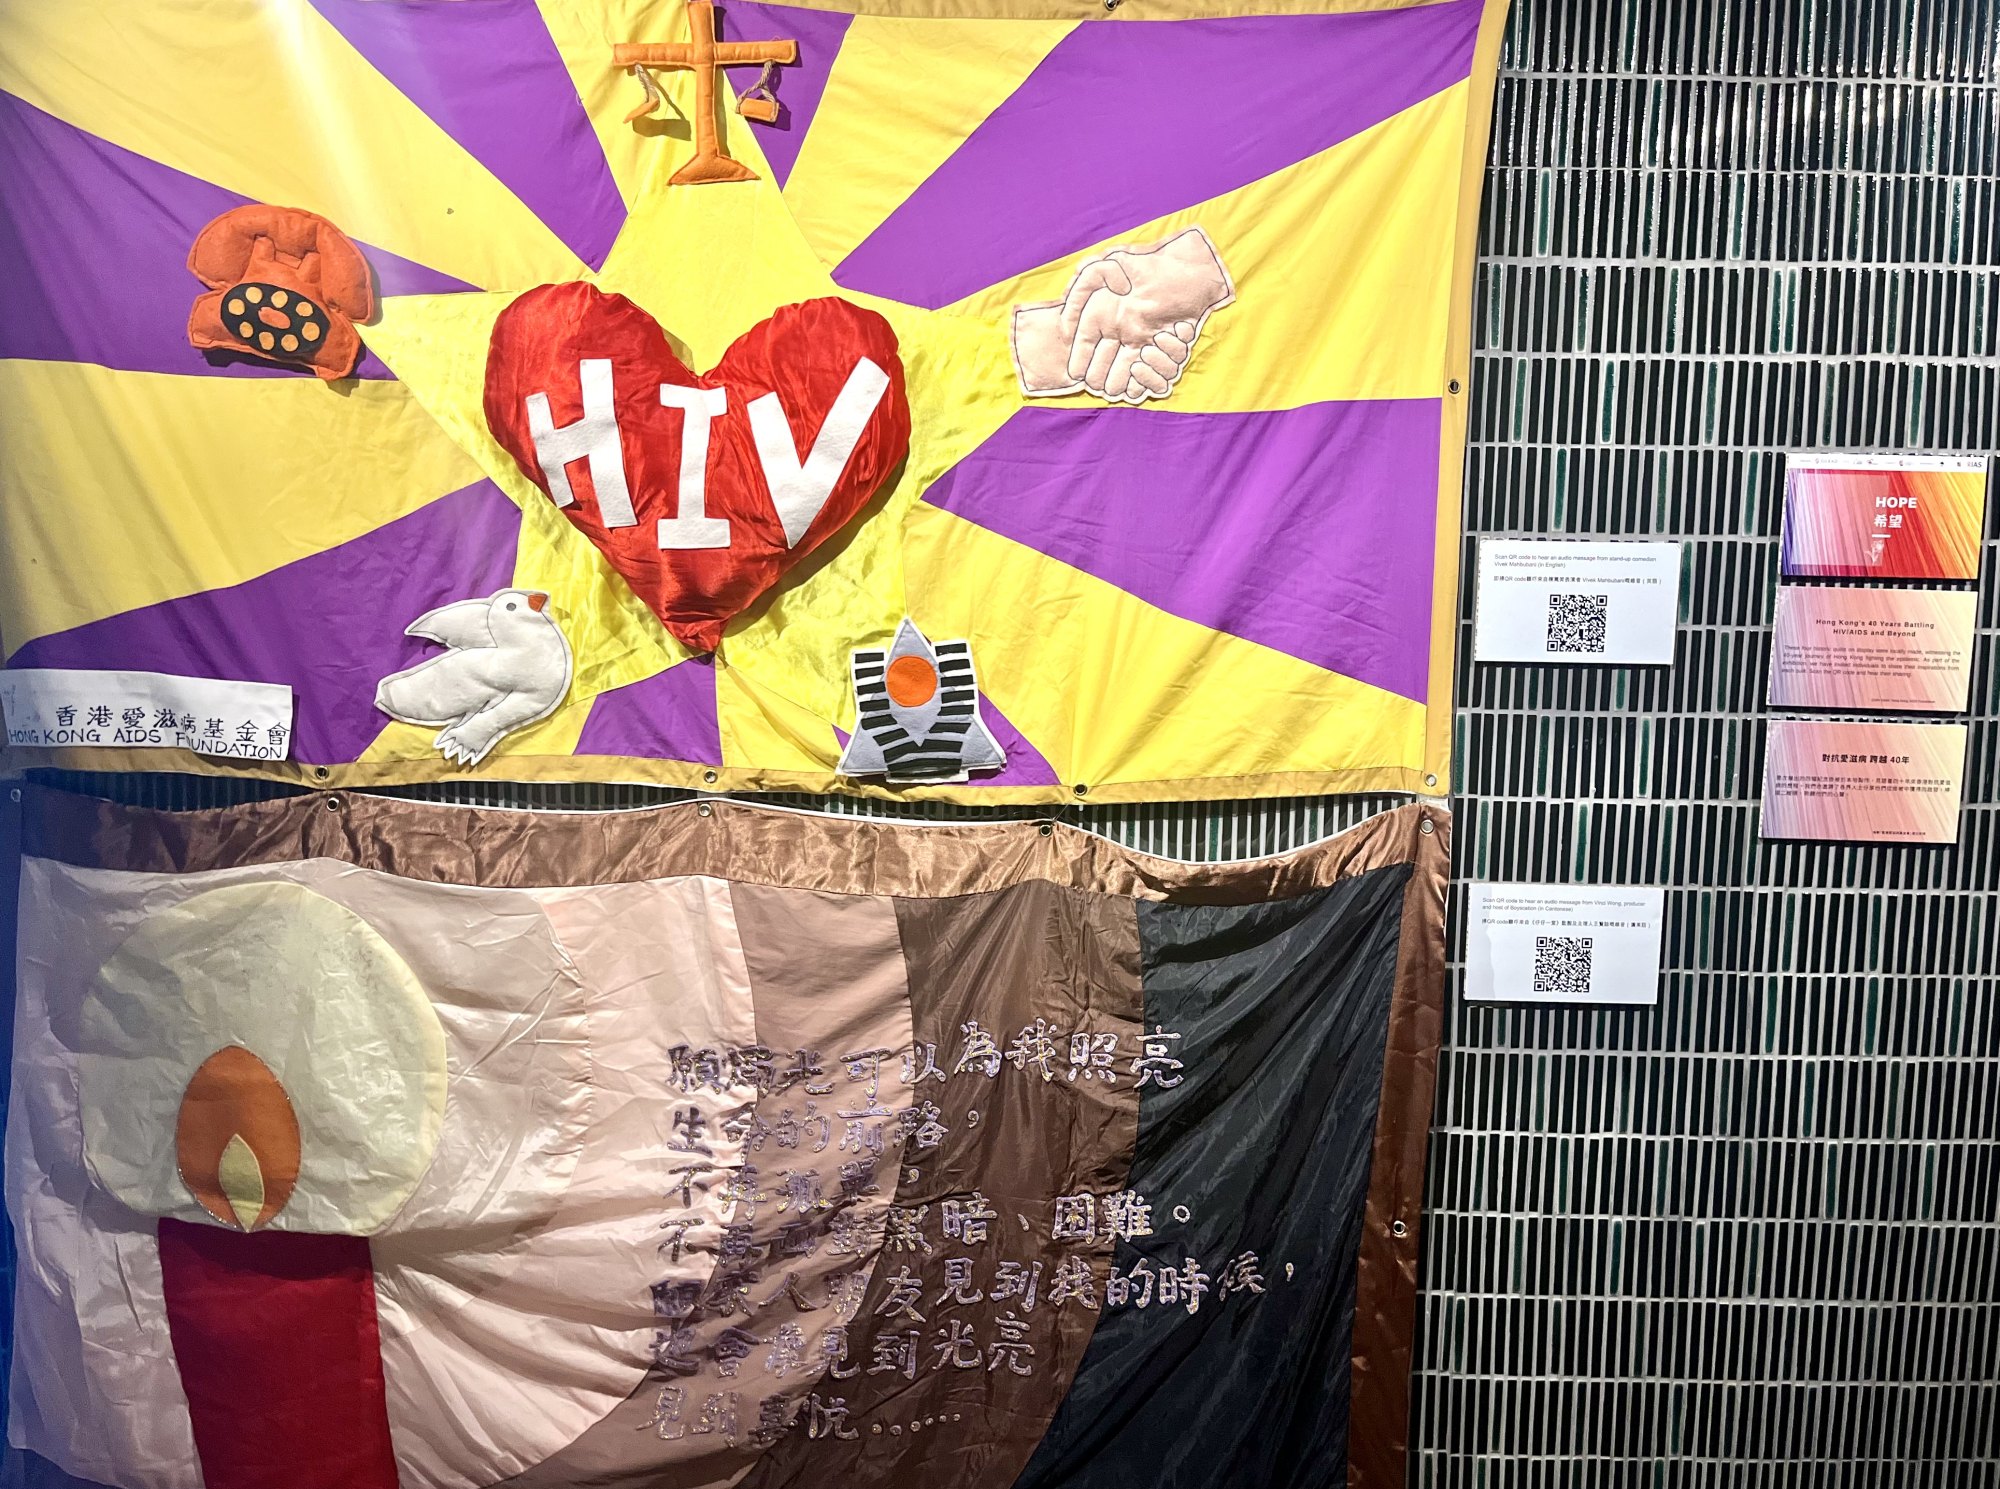 living with hiv/aids: hong kong quilt exhibit instils sense of connection among survivors, and helps battle stigma